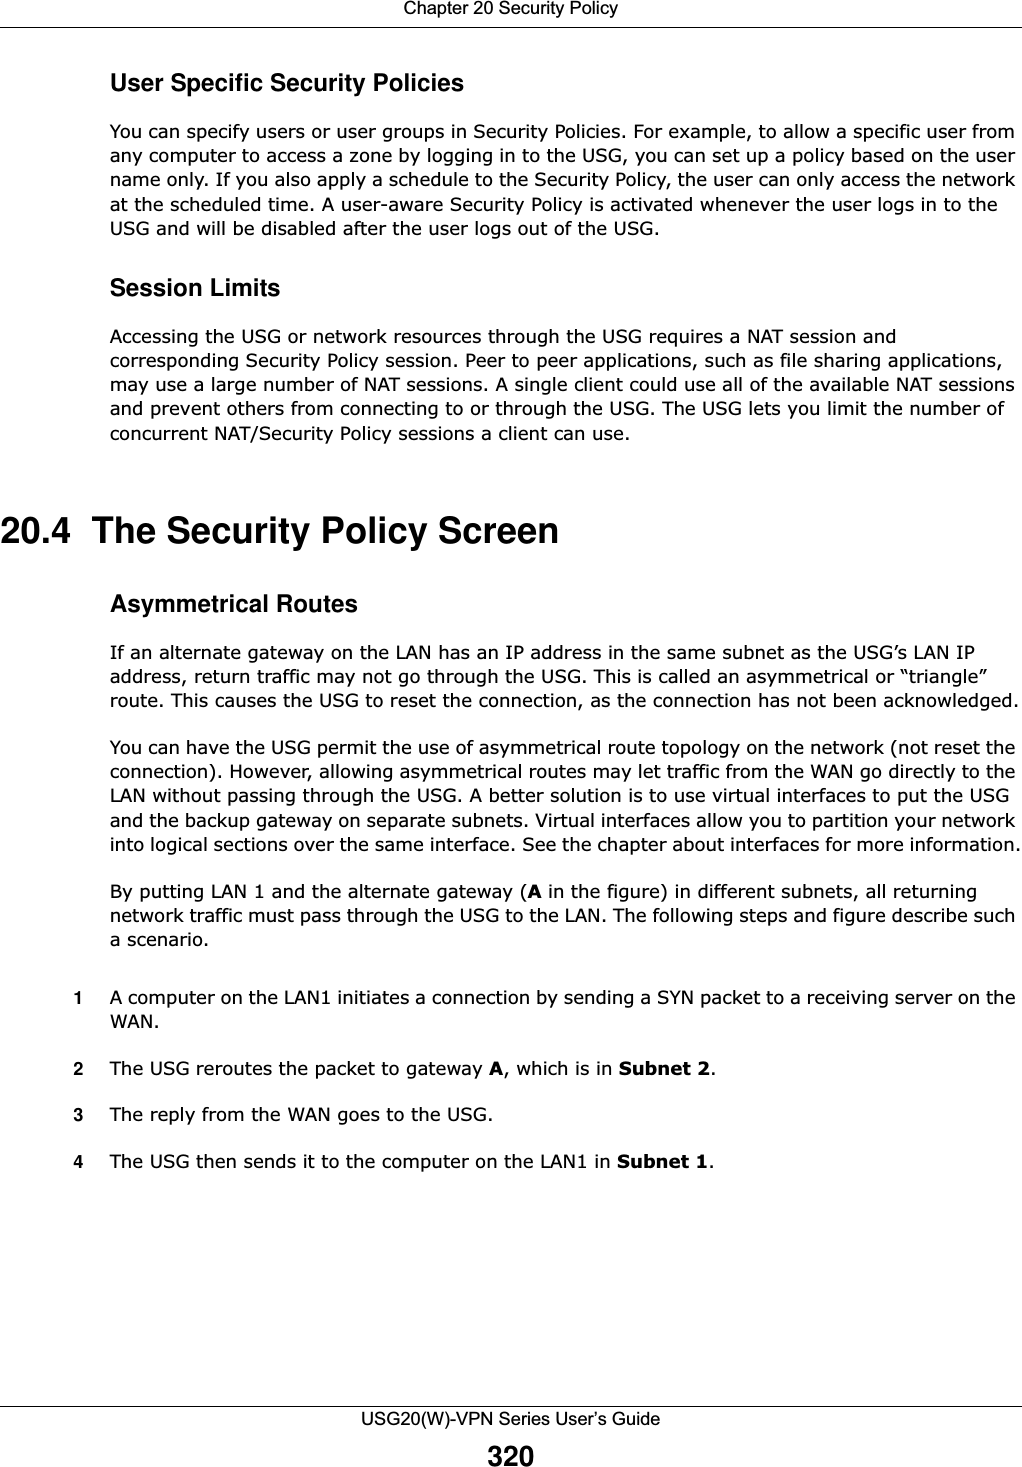 Chapter 20 Security PolicyUSG20(W)-VPN Series User’s Guide320User Specific Security PoliciesYou can specify users or user groups in Security Policies. For example, to allow a specific user from any computer to access a zone by logging in to the USG, you can set up a policy based on the user name only. If you also apply a schedule to the Security Policy, the user can only access the network at the scheduled time. A user-aware Security Policy is activated whenever the user logs in to the USG and will be disabled after the user logs out of the USG.Session LimitsAccessing the USG or network resources through the USG requires a NAT session and corresponding Security Policy session. Peer to peer applications, such as file sharing applications, may use a large number of NAT sessions. A single client could use all of the available NAT sessions and prevent others from connecting to or through the USG. The USG lets you limit the number of concurrent NAT/Security Policy sessions a client can use.20.4  The Security Policy ScreenAsymmetrical RoutesIf an alternate gateway on the LAN has an IP address in the same subnet as the USG’s LAN IP address, return traffic may not go through the USG. This is called an asymmetrical or “triangle” route. This causes the USG to reset the connection, as the connection has not been acknowledged.You can have the USG permit the use of asymmetrical route topology on the network (not reset the connection). However, allowing asymmetrical routes may let traffic from the WAN go directly to the LAN without passing through the USG. A better solution is to use virtual interfaces to put the USG and the backup gateway on separate subnets. Virtual interfaces allow you to partition your network into logical sections over the same interface. See the chapter about interfaces for more information.By putting LAN 1 and the alternate gateway (A in the figure) in different subnets, all returning network traffic must pass through the USG to the LAN. The following steps and figure describe such a scenario.1A computer on the LAN1 initiates a connection by sending a SYN packet to a receiving server on the WAN.2The USG reroutes the packet to gateway A, which is in Subnet 2. 3The reply from the WAN goes to the USG. 4The USG then sends it to the computer on the LAN1 in Subnet 1. 